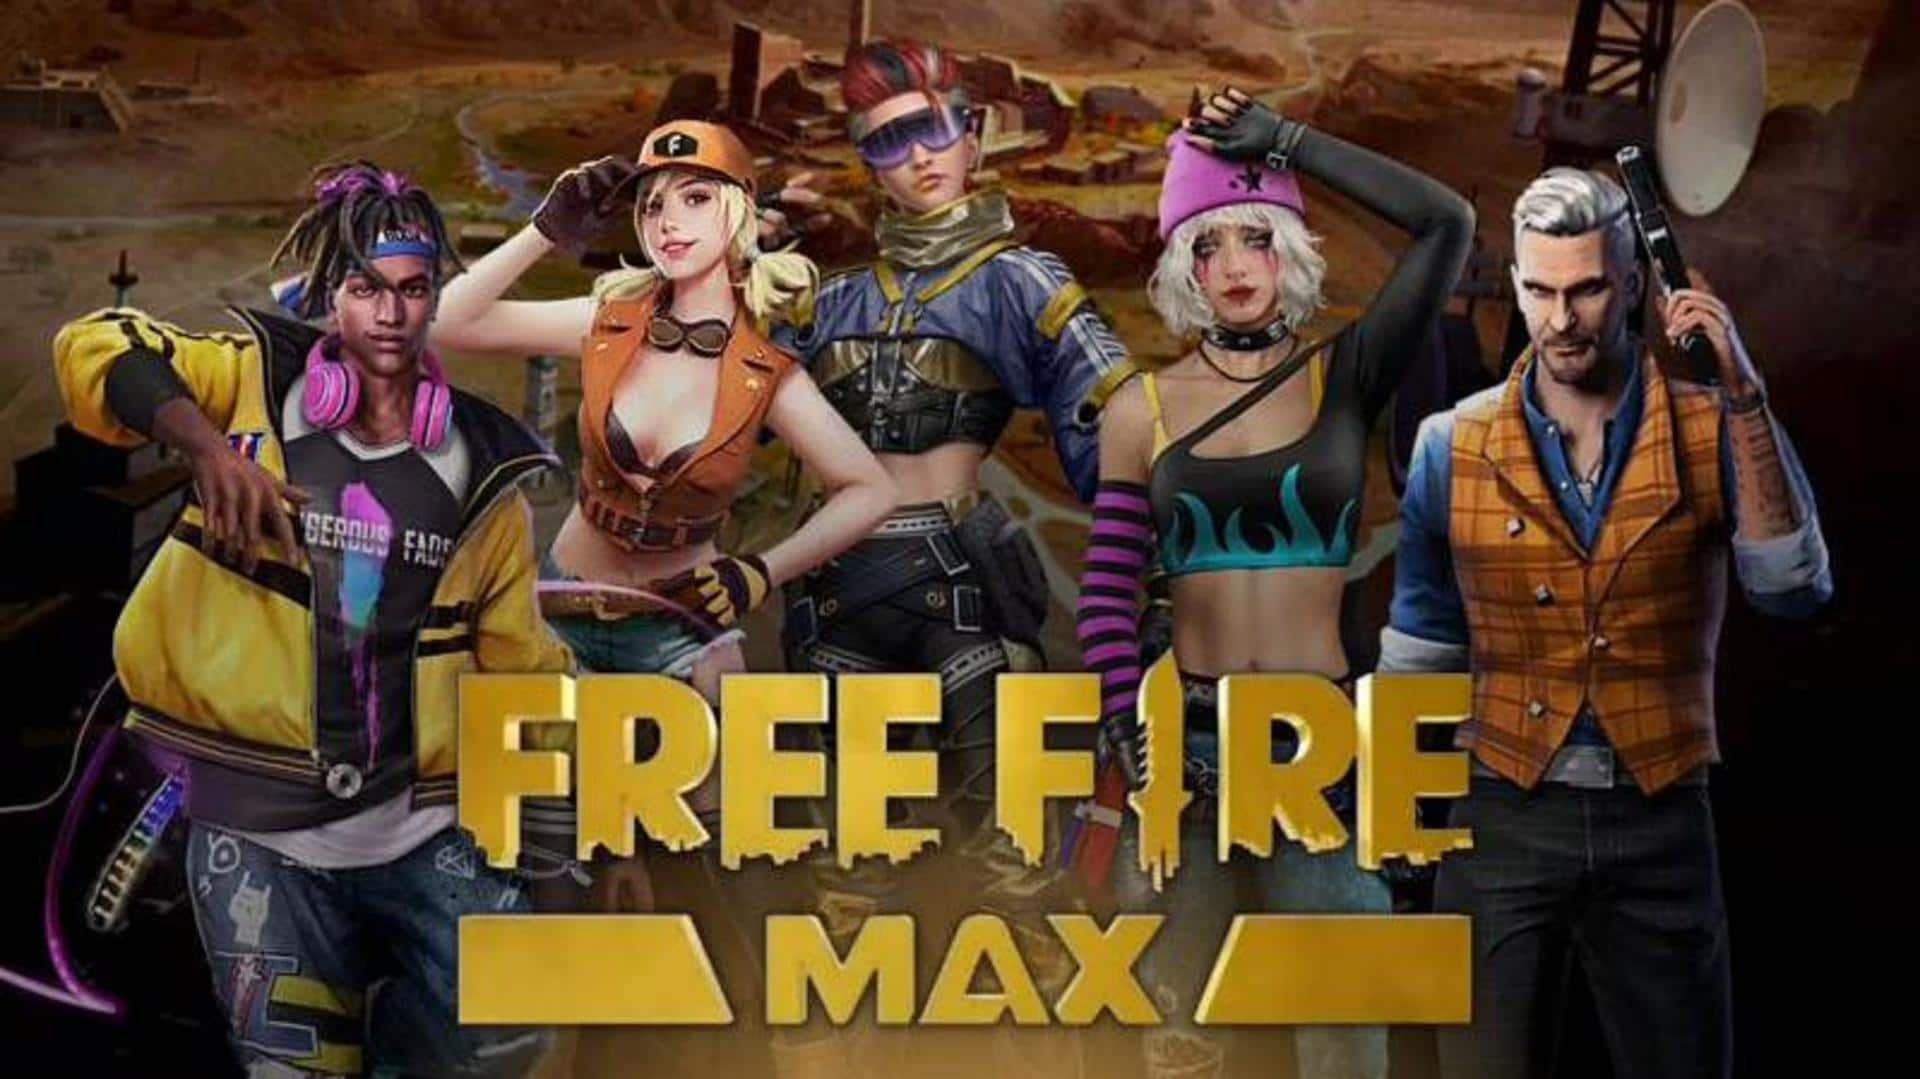 Garena Free Fire MAX's July 28 codes: How to redeem